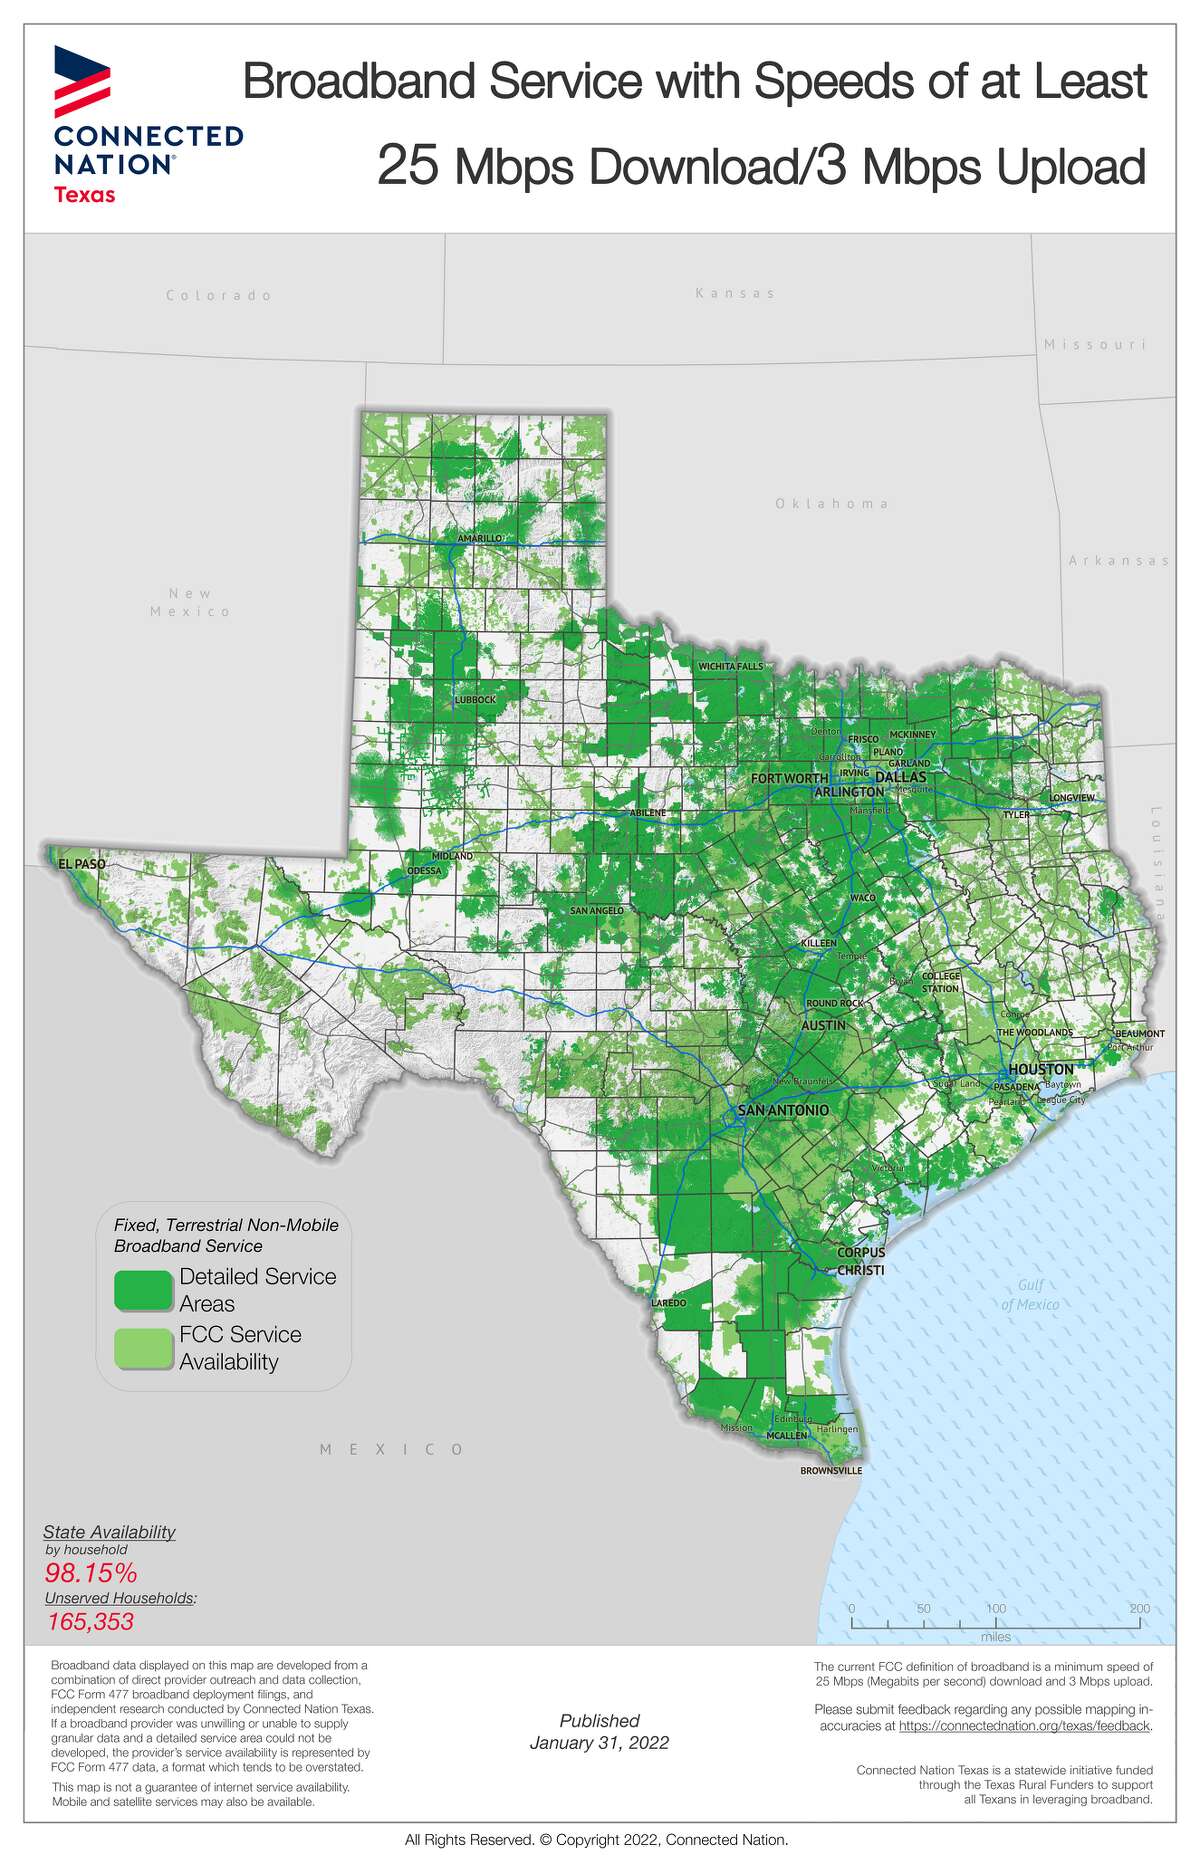 An image of Texas broadband coverage at 25x3 Mbps speed